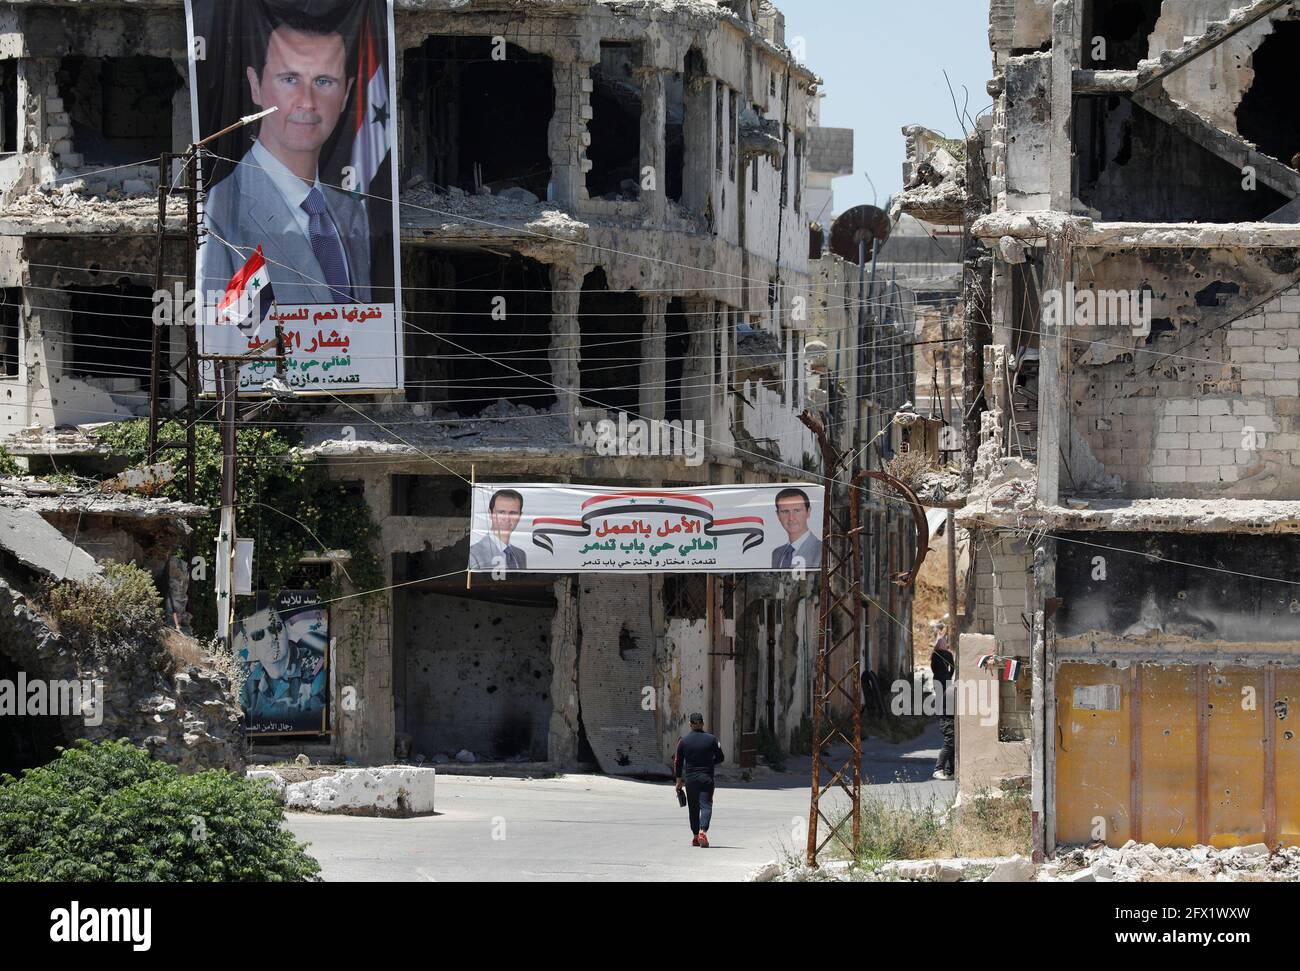 A man walk past banners depciting Syria's President Bashar al-Assad, near damaged buildings, ahead of the May 26 presidential election, in Homs, Syria May 23, 2021.  Picture taken May 23, 2021. REUTERS/Omar Sanadiki Stock Photo